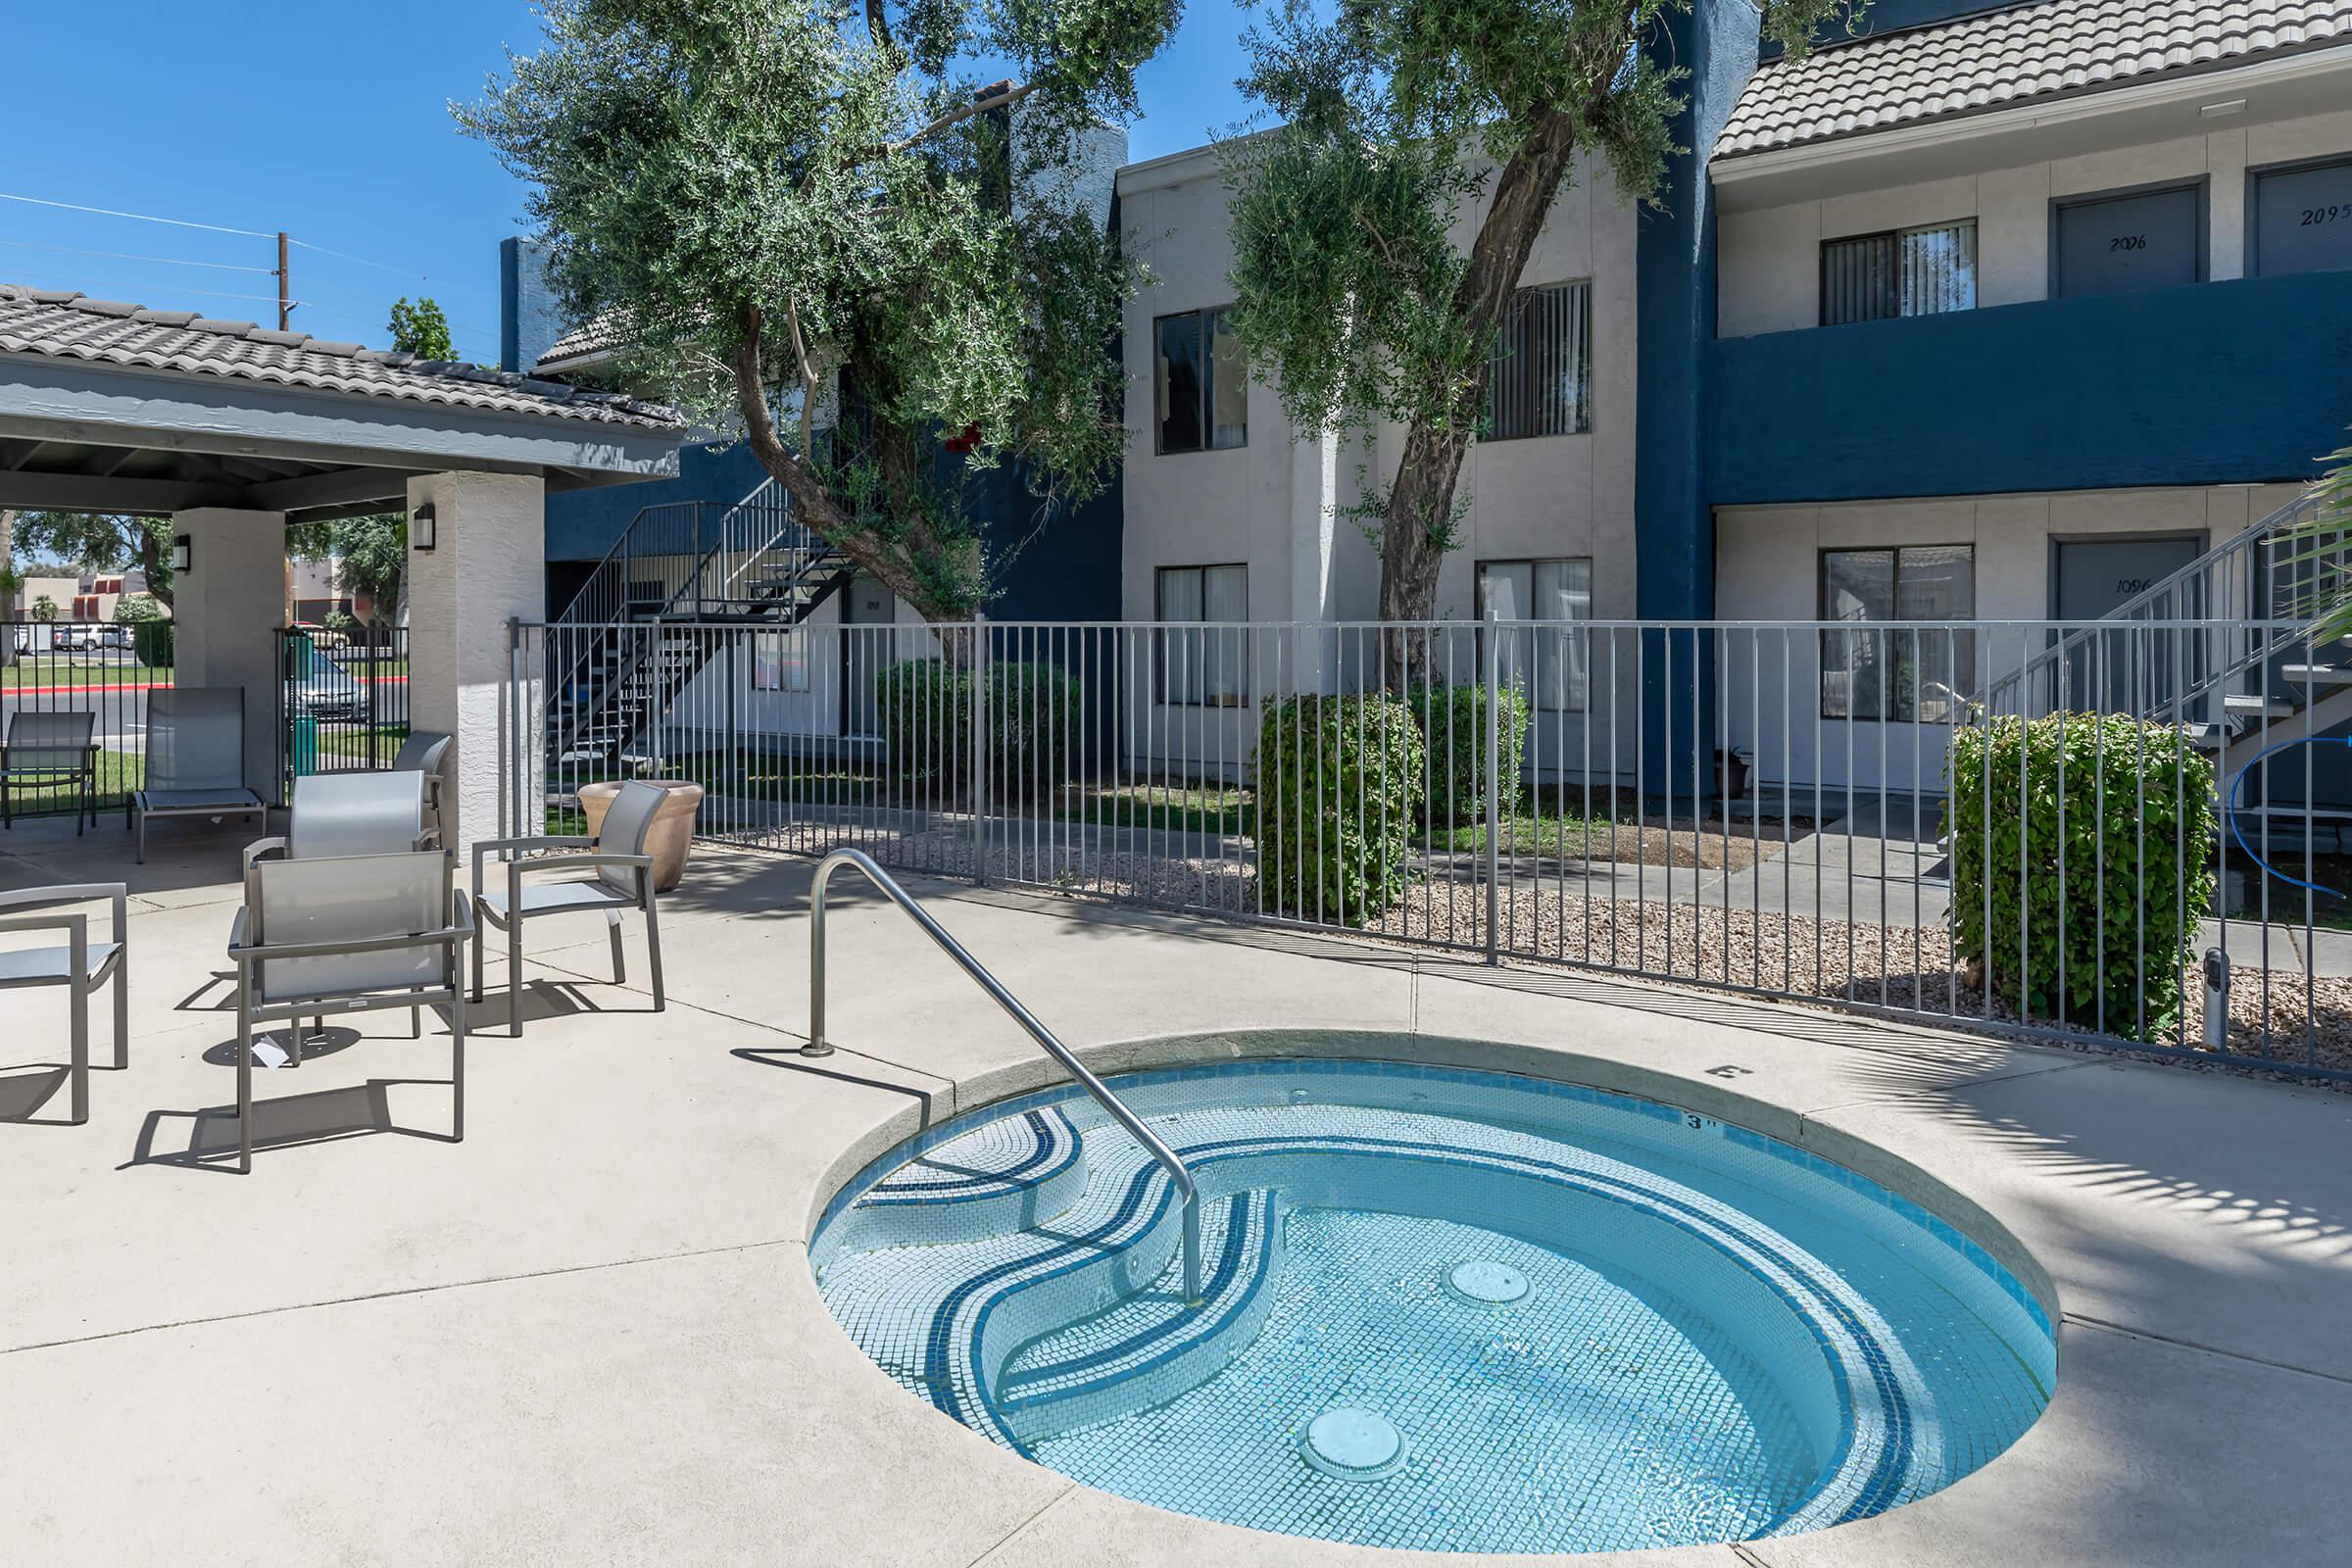 Outdoor in-ground hot tub and jacuzzi area at Rise Camelback